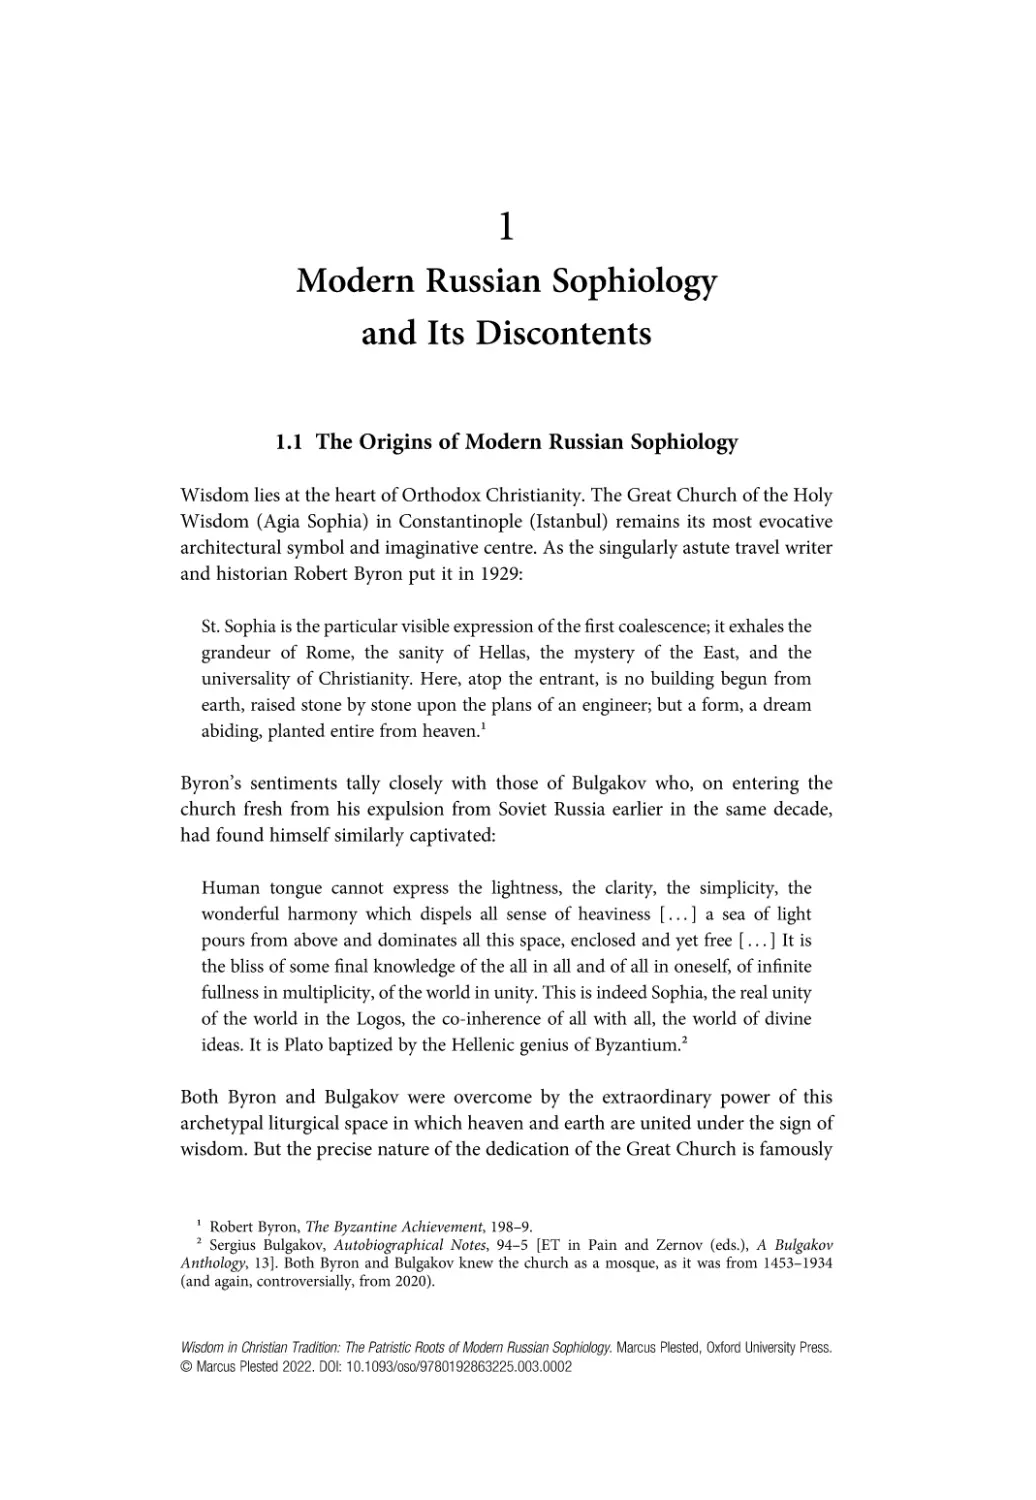 1
1.1 The Origins of Modern Russian Sophiology